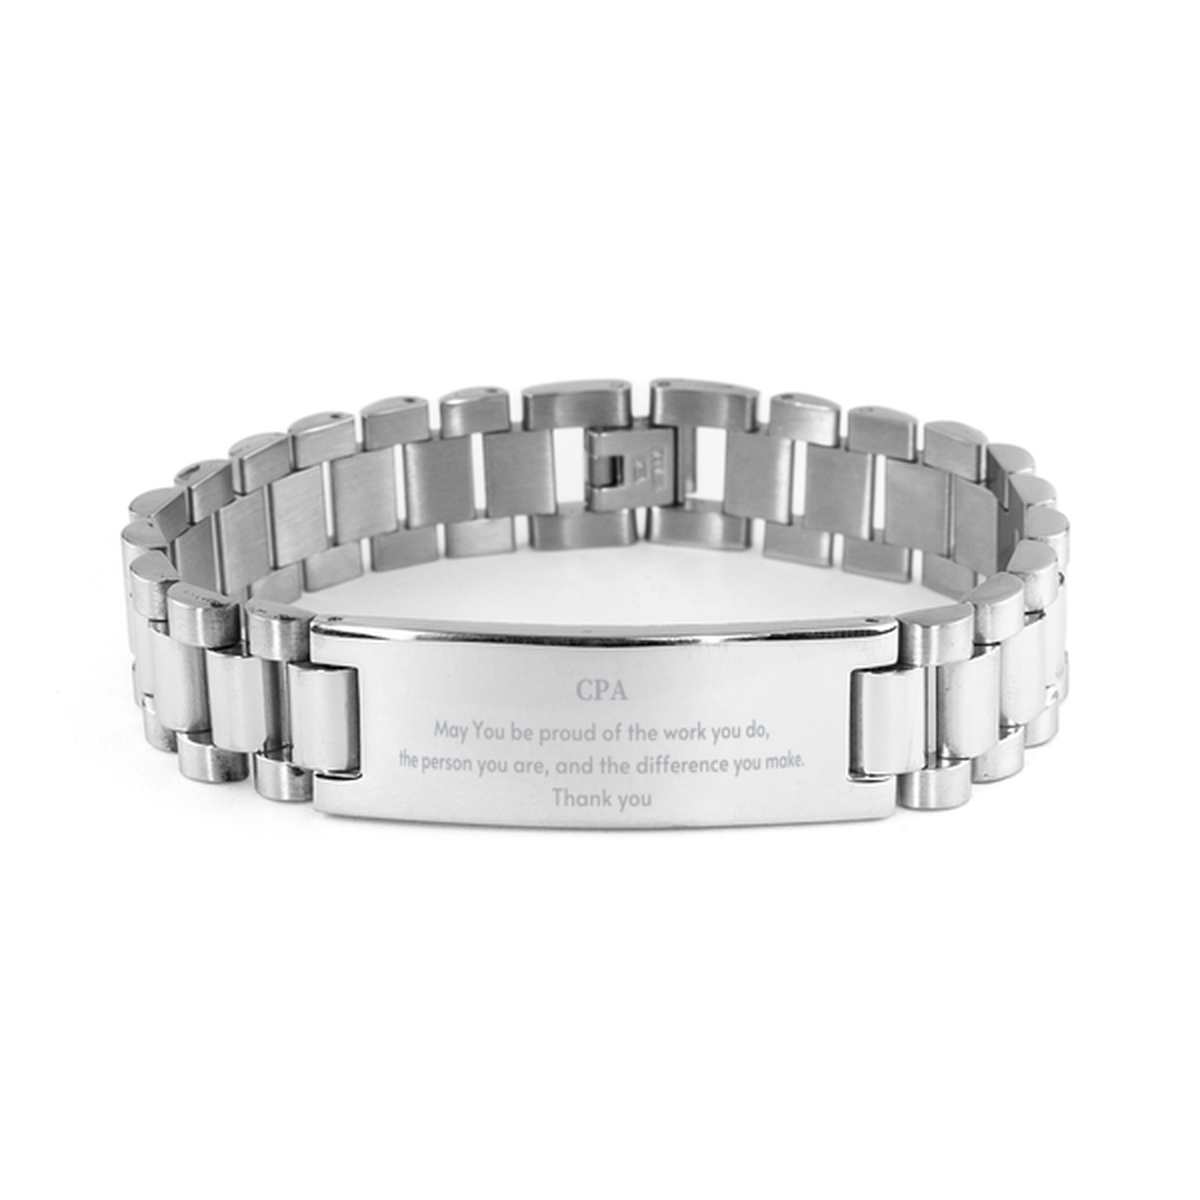 Heartwarming Ladder Stainless Steel Bracelet Retirement Coworkers Gifts for CPA, CPA May You be proud of the work you do, the person you are Gifts for Boss Men Women Friends